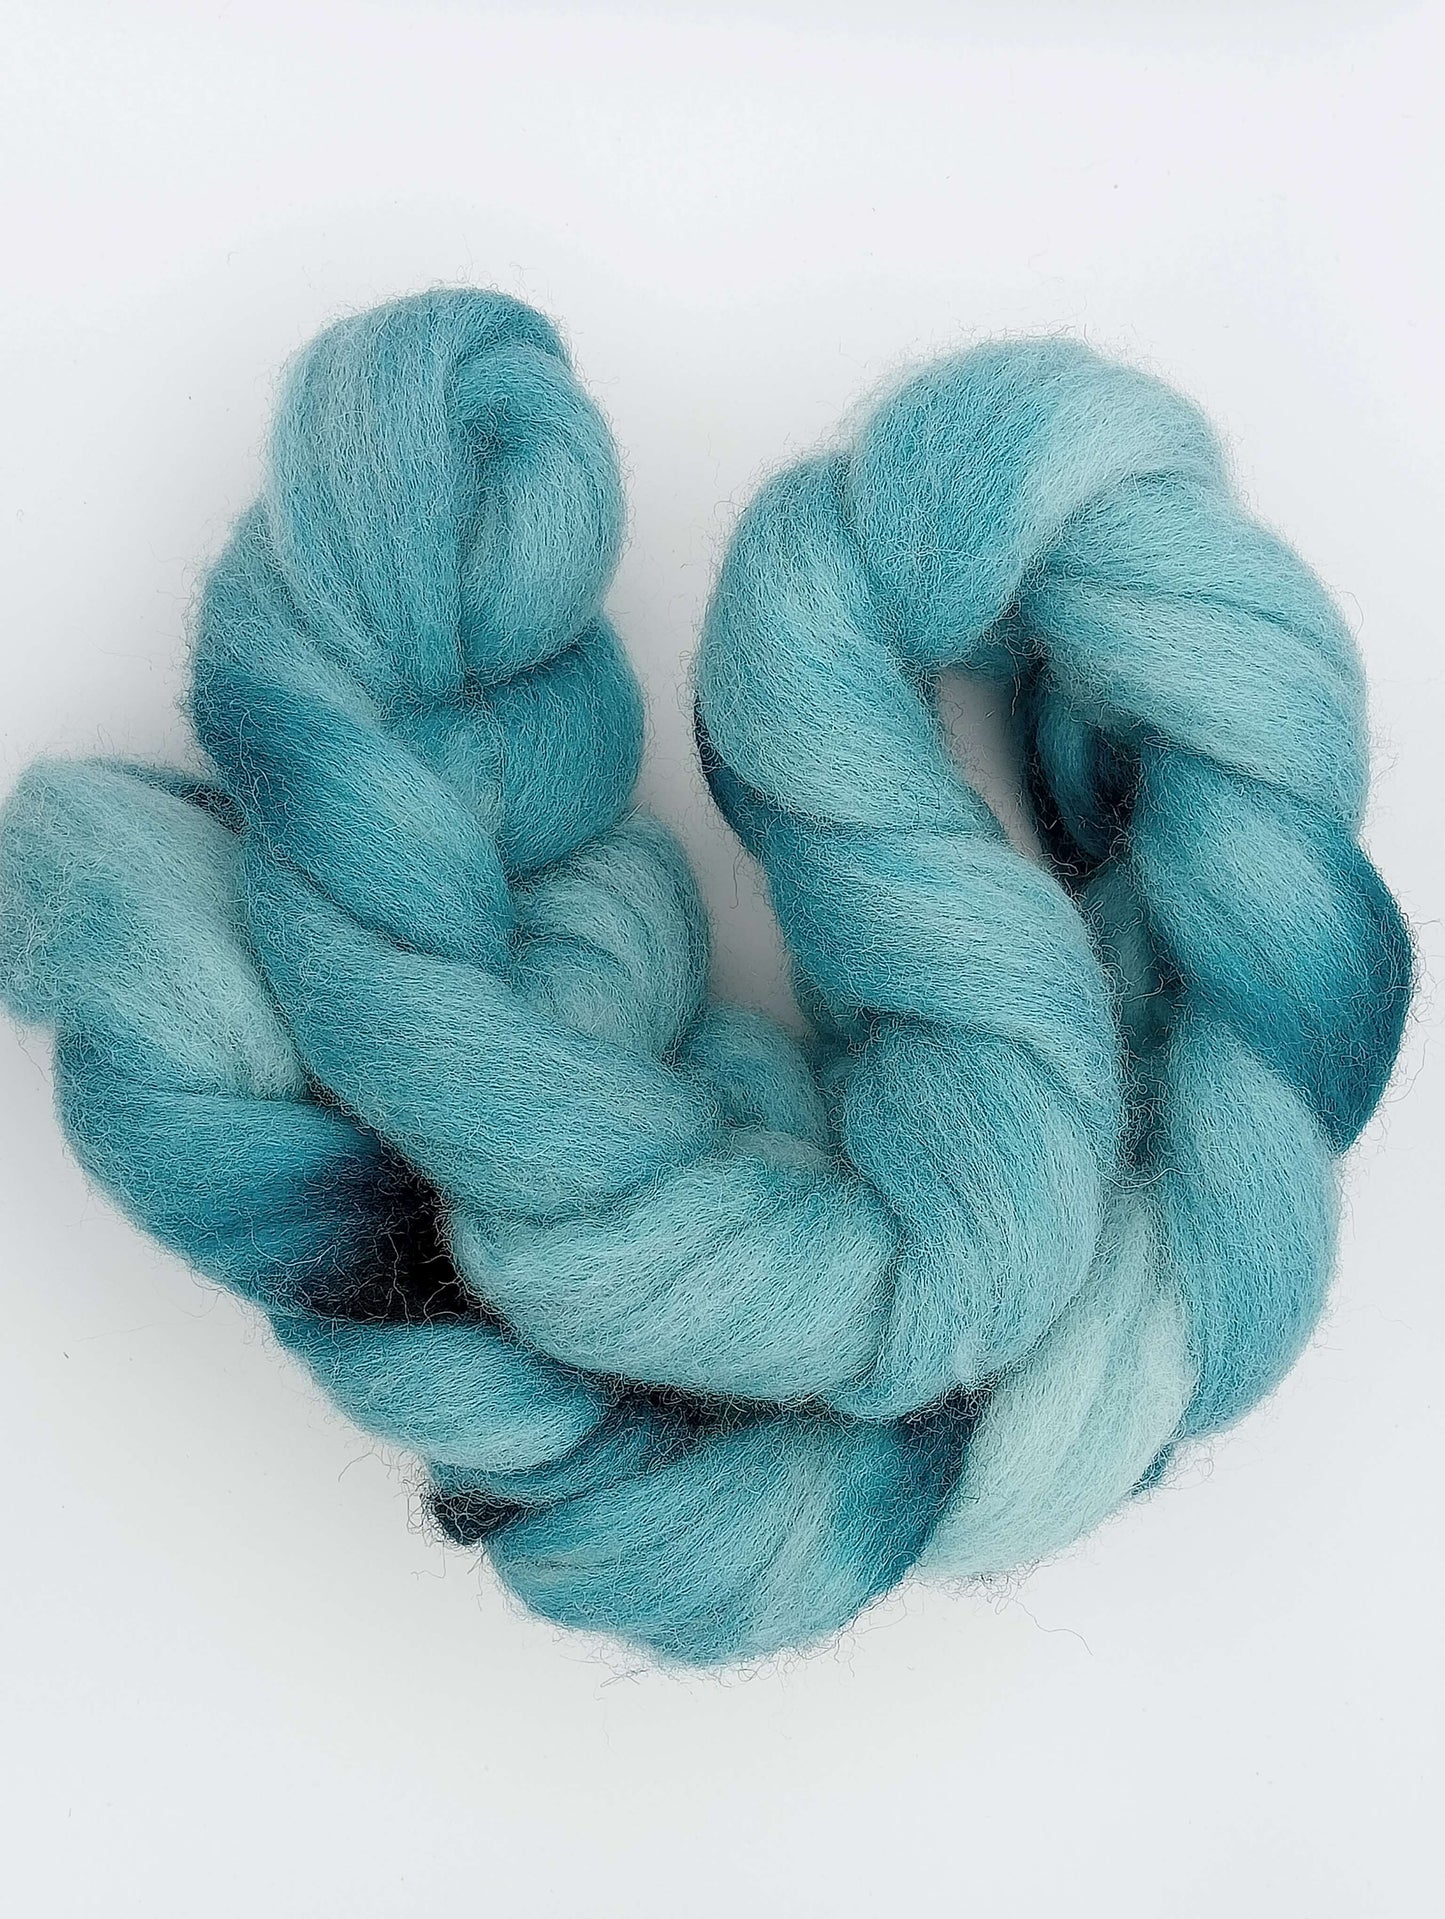 100G New Zealand Blend - "Squeal for Teal"